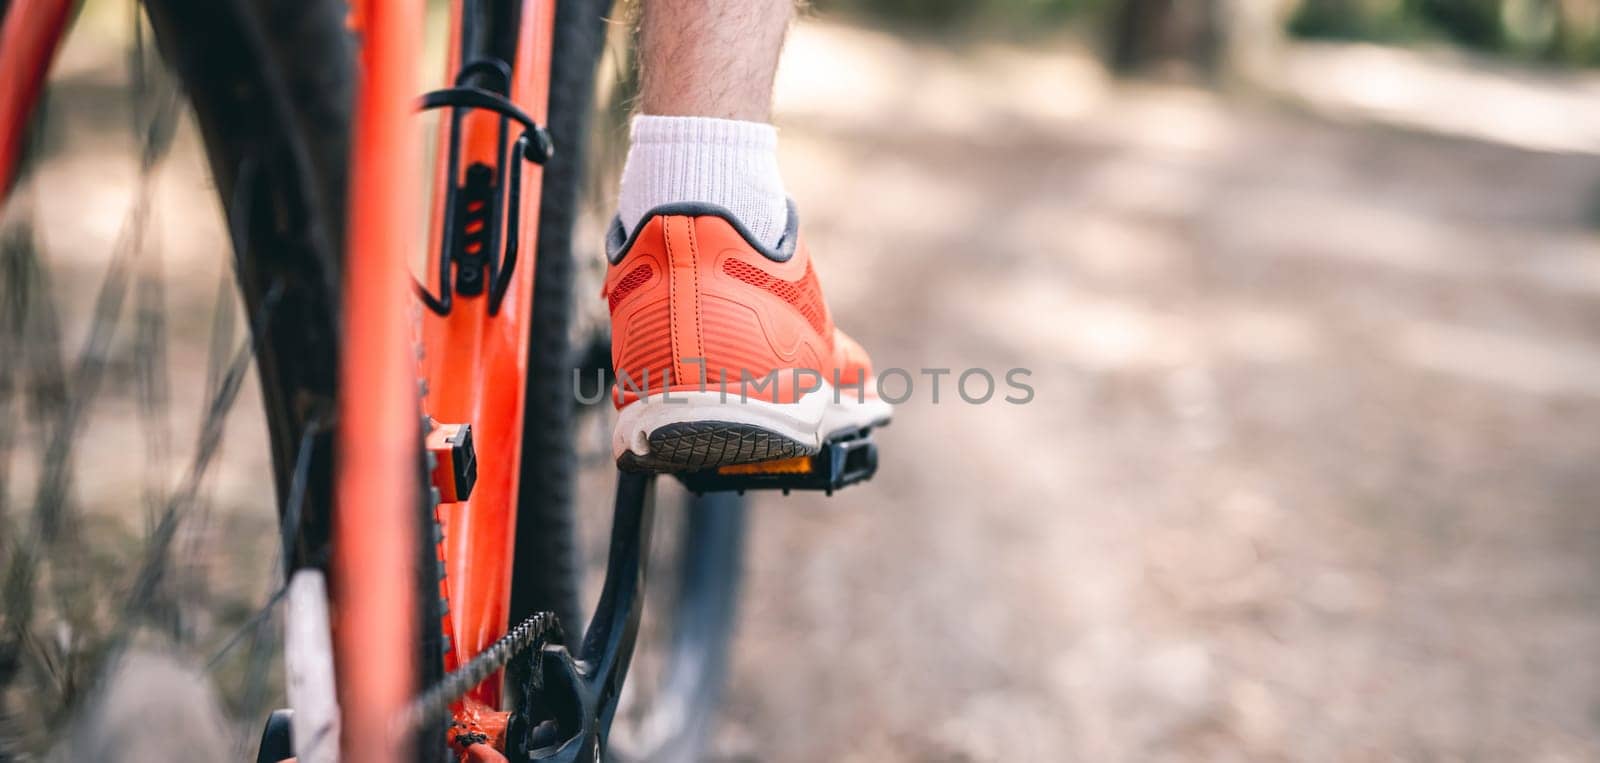 Leg in sneaker on bicycle pedal during riding outdoors